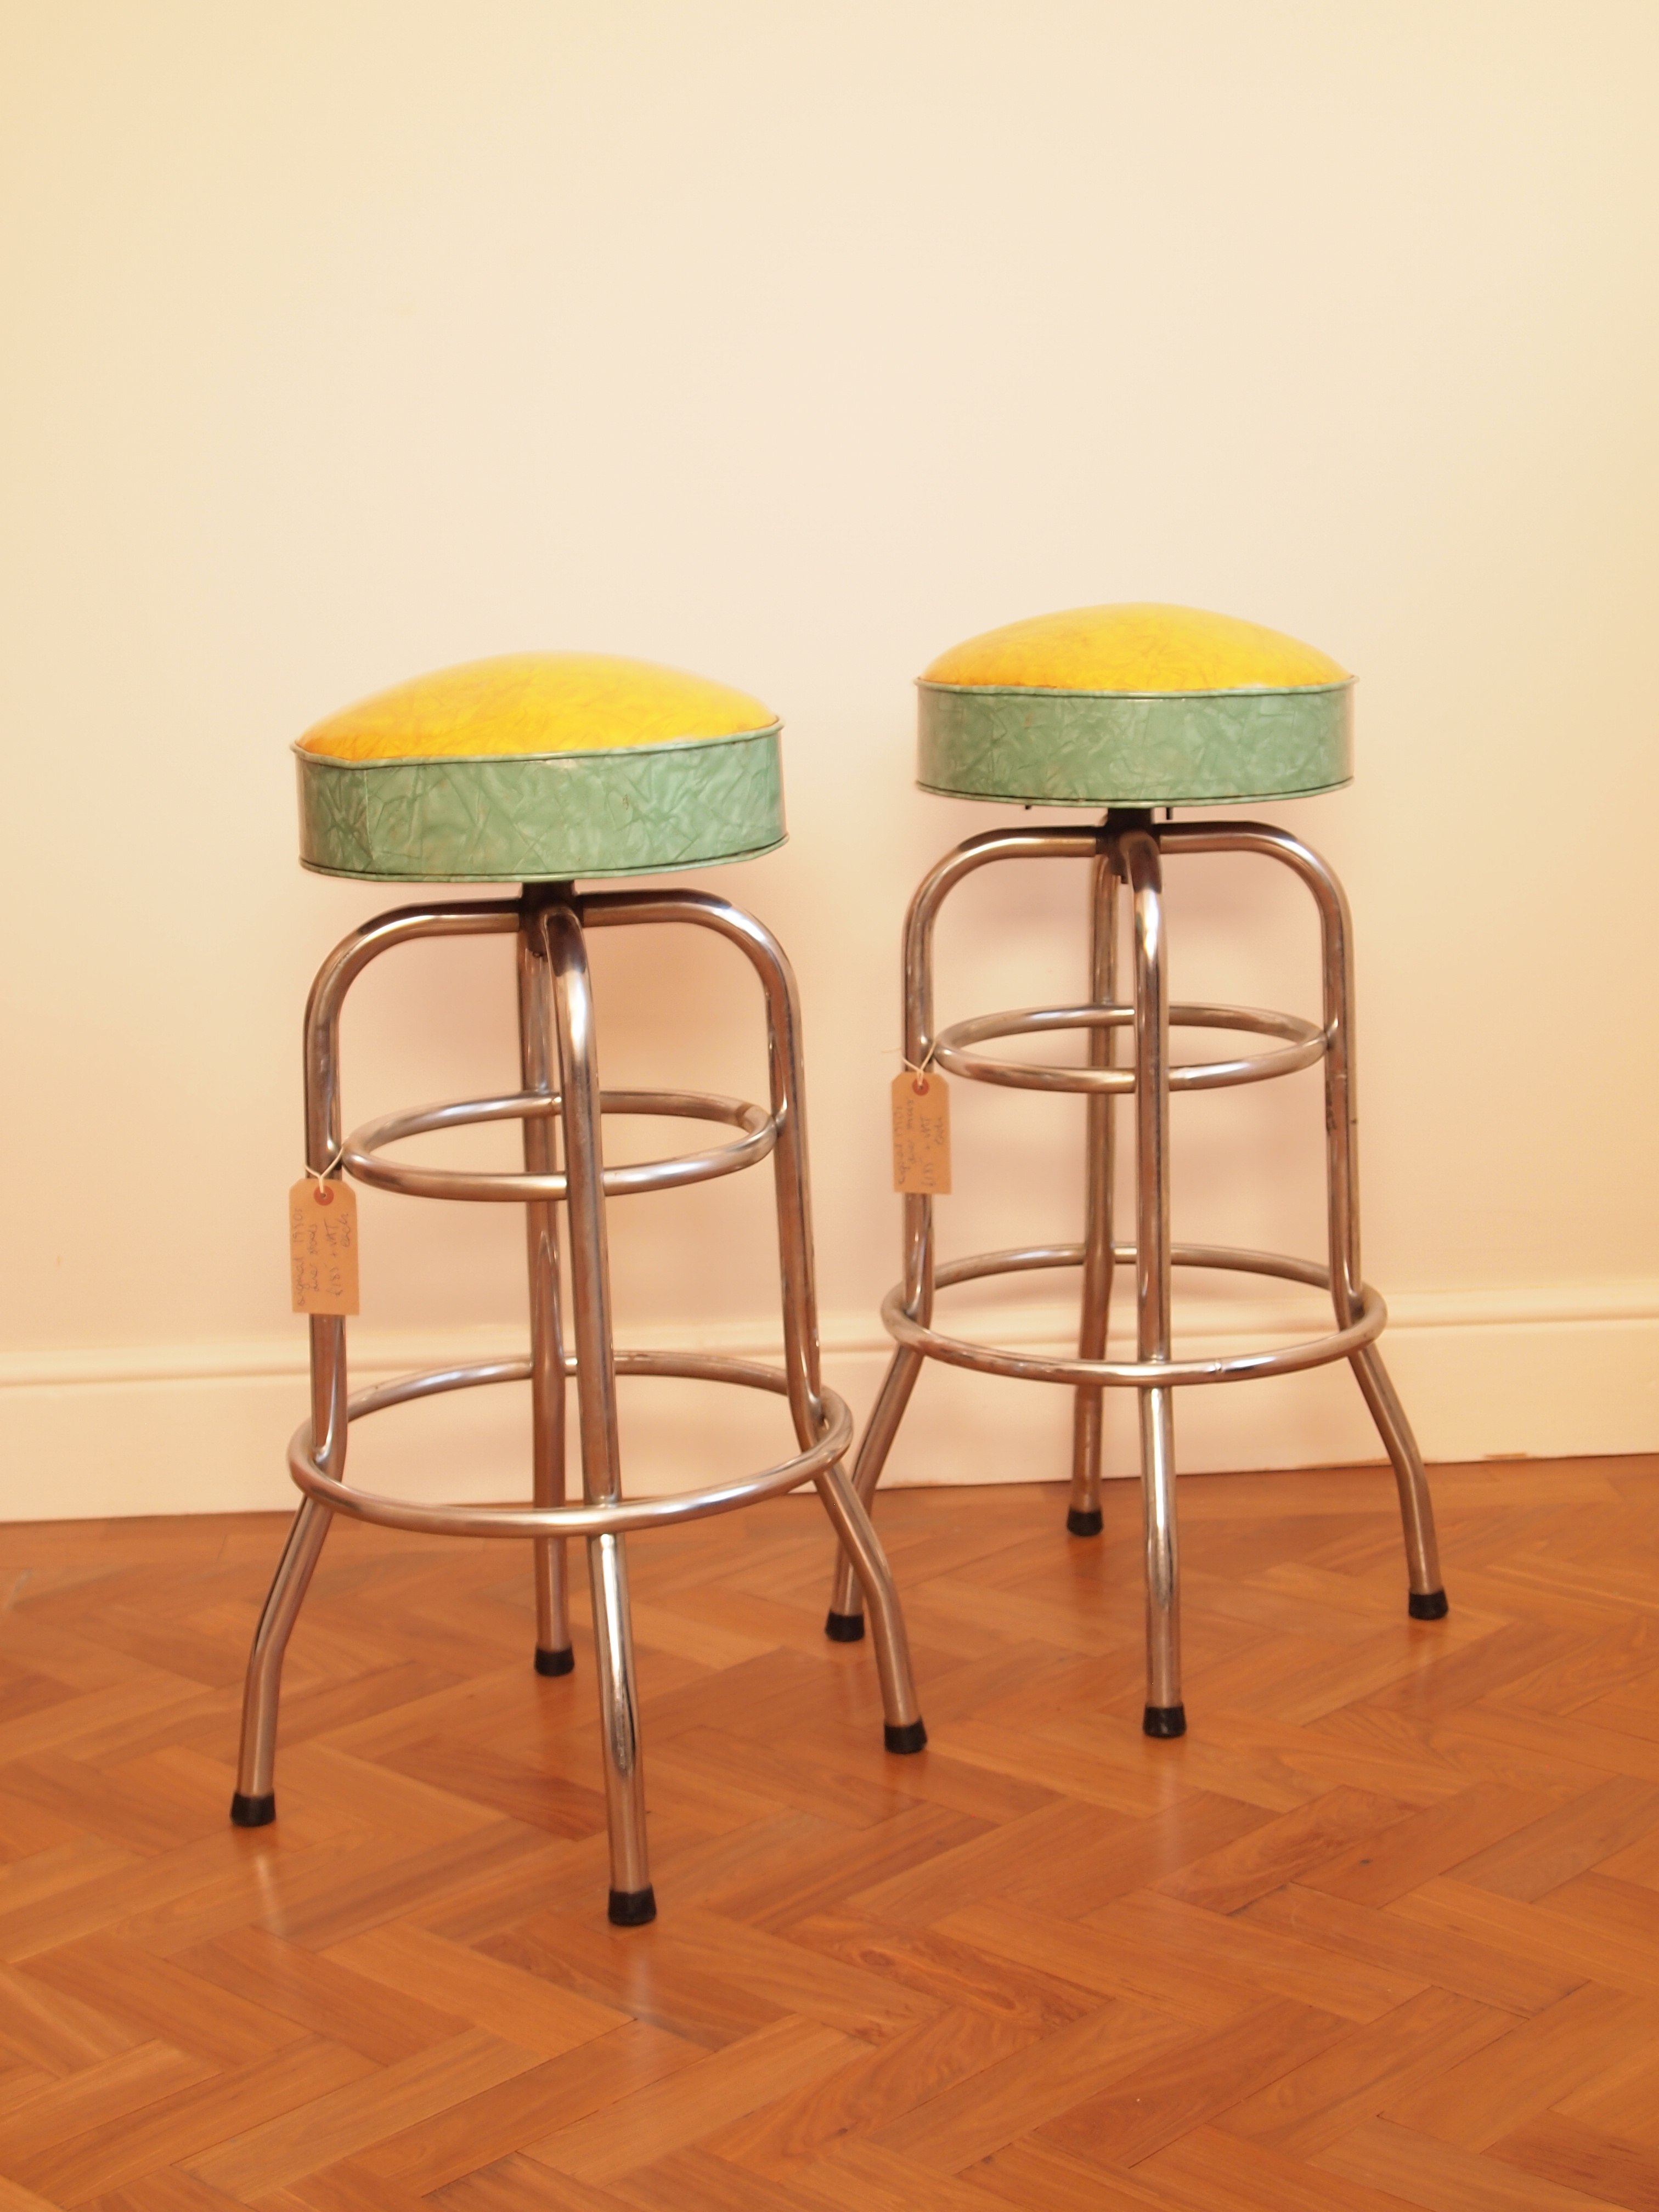 50’s American Diner Stools